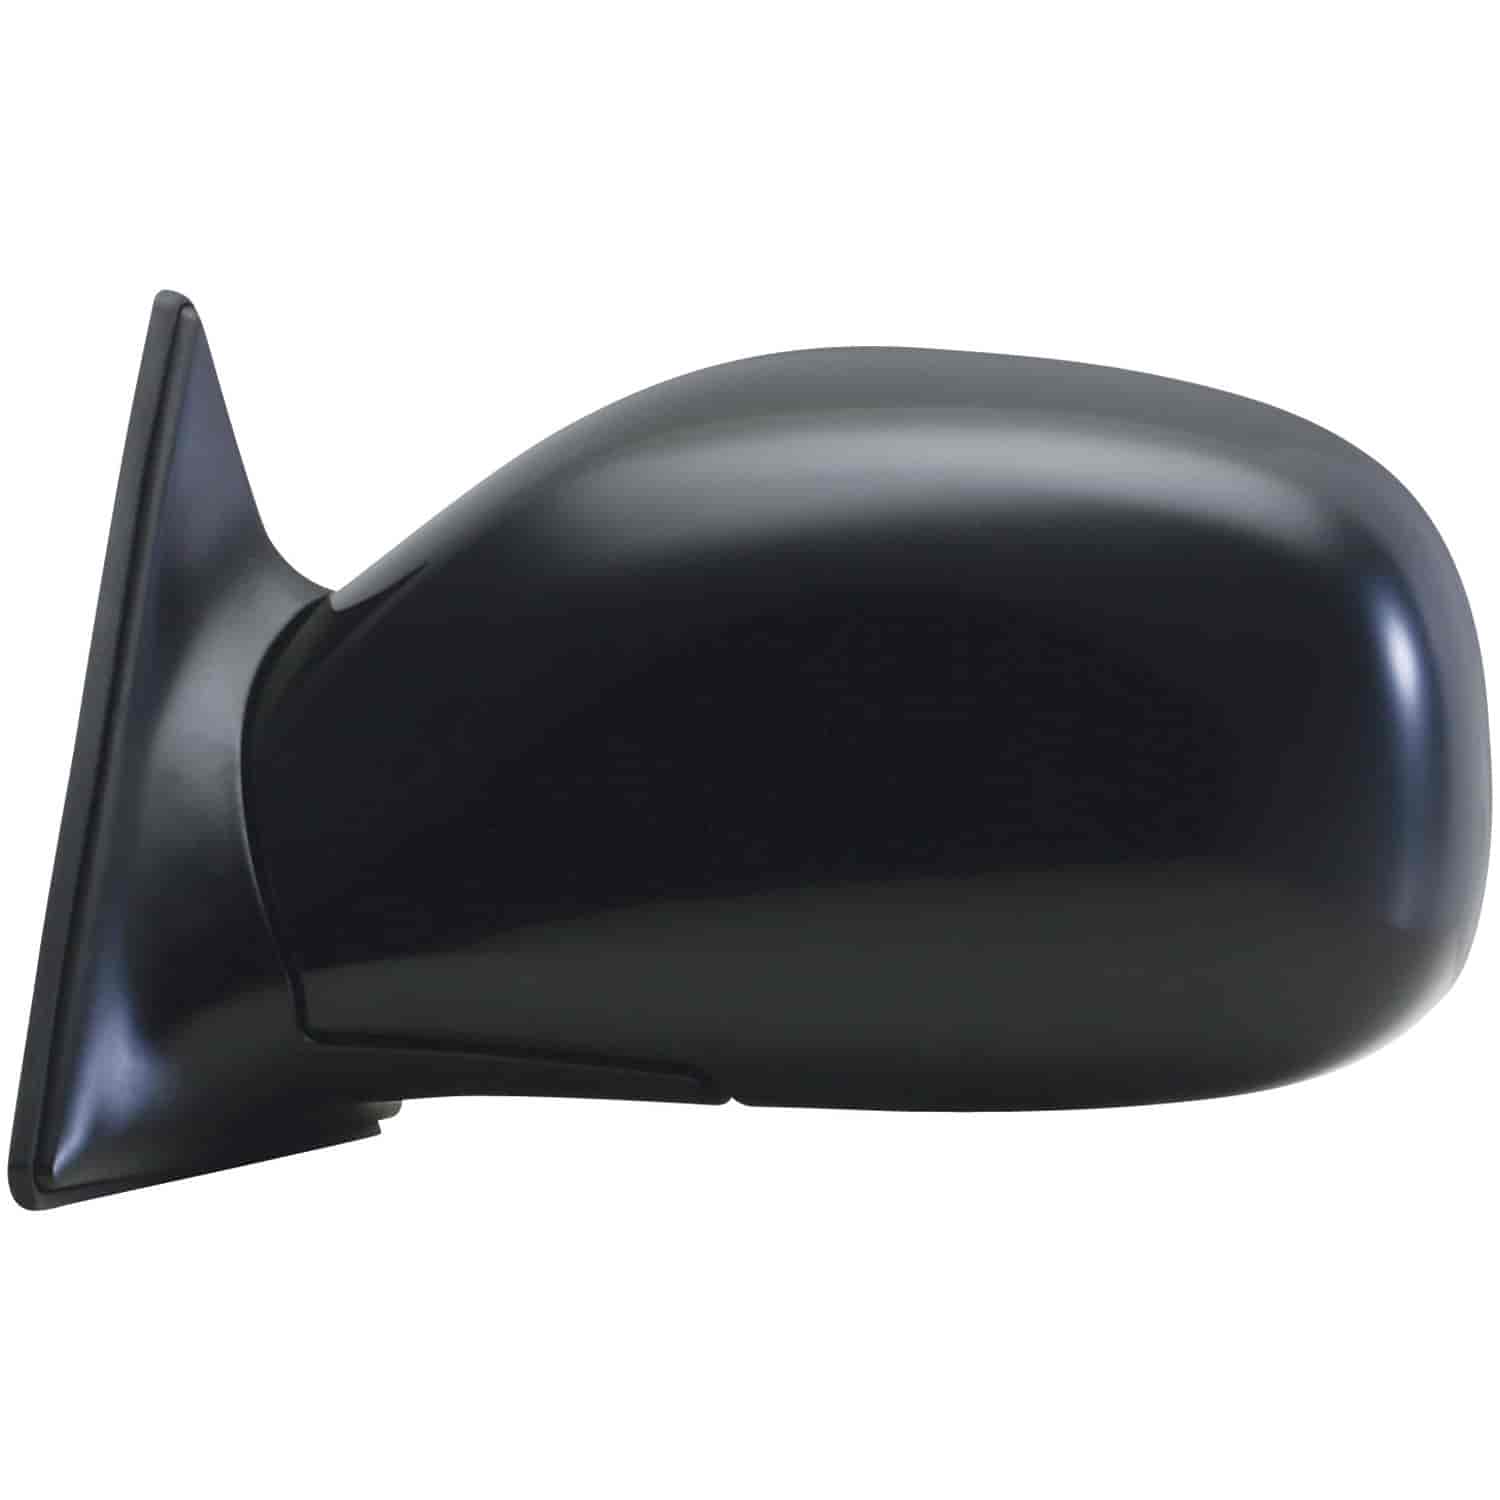 OEM Style Replacement mirror for 96-00 Toyota RAV4 2 Door driver side mirror tested to fit and funct